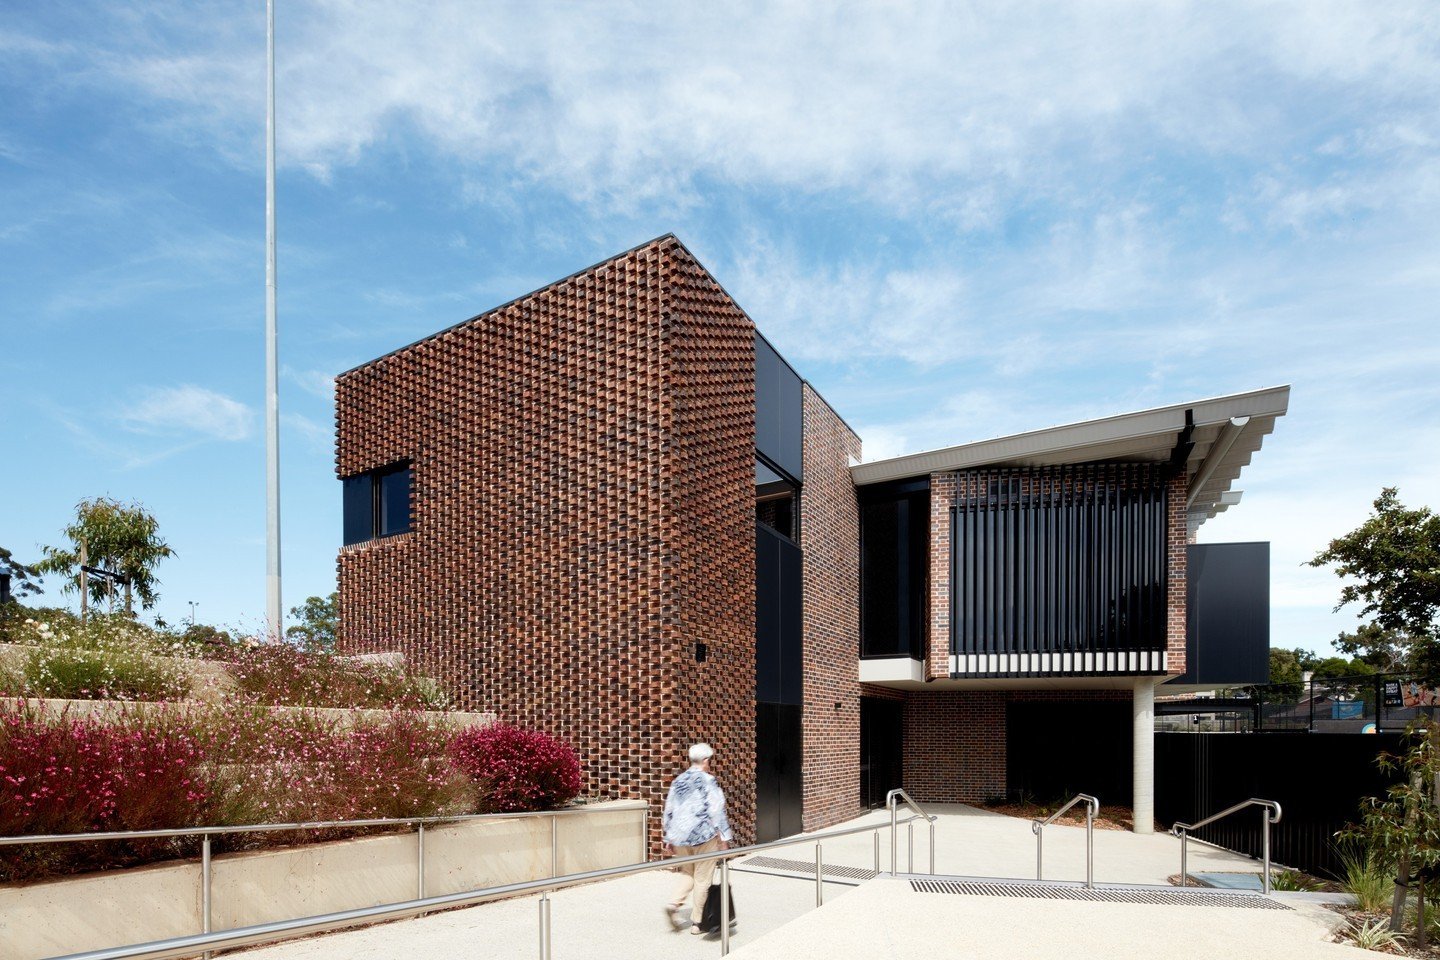 The textured brick facade of the @balwynparktennisclub is undoubtedly the design hero of the facility. Standing tall, the multipurpose building allows for optimal viewing of community sporting matches from the comfort of the great indoors.

Bricks: K